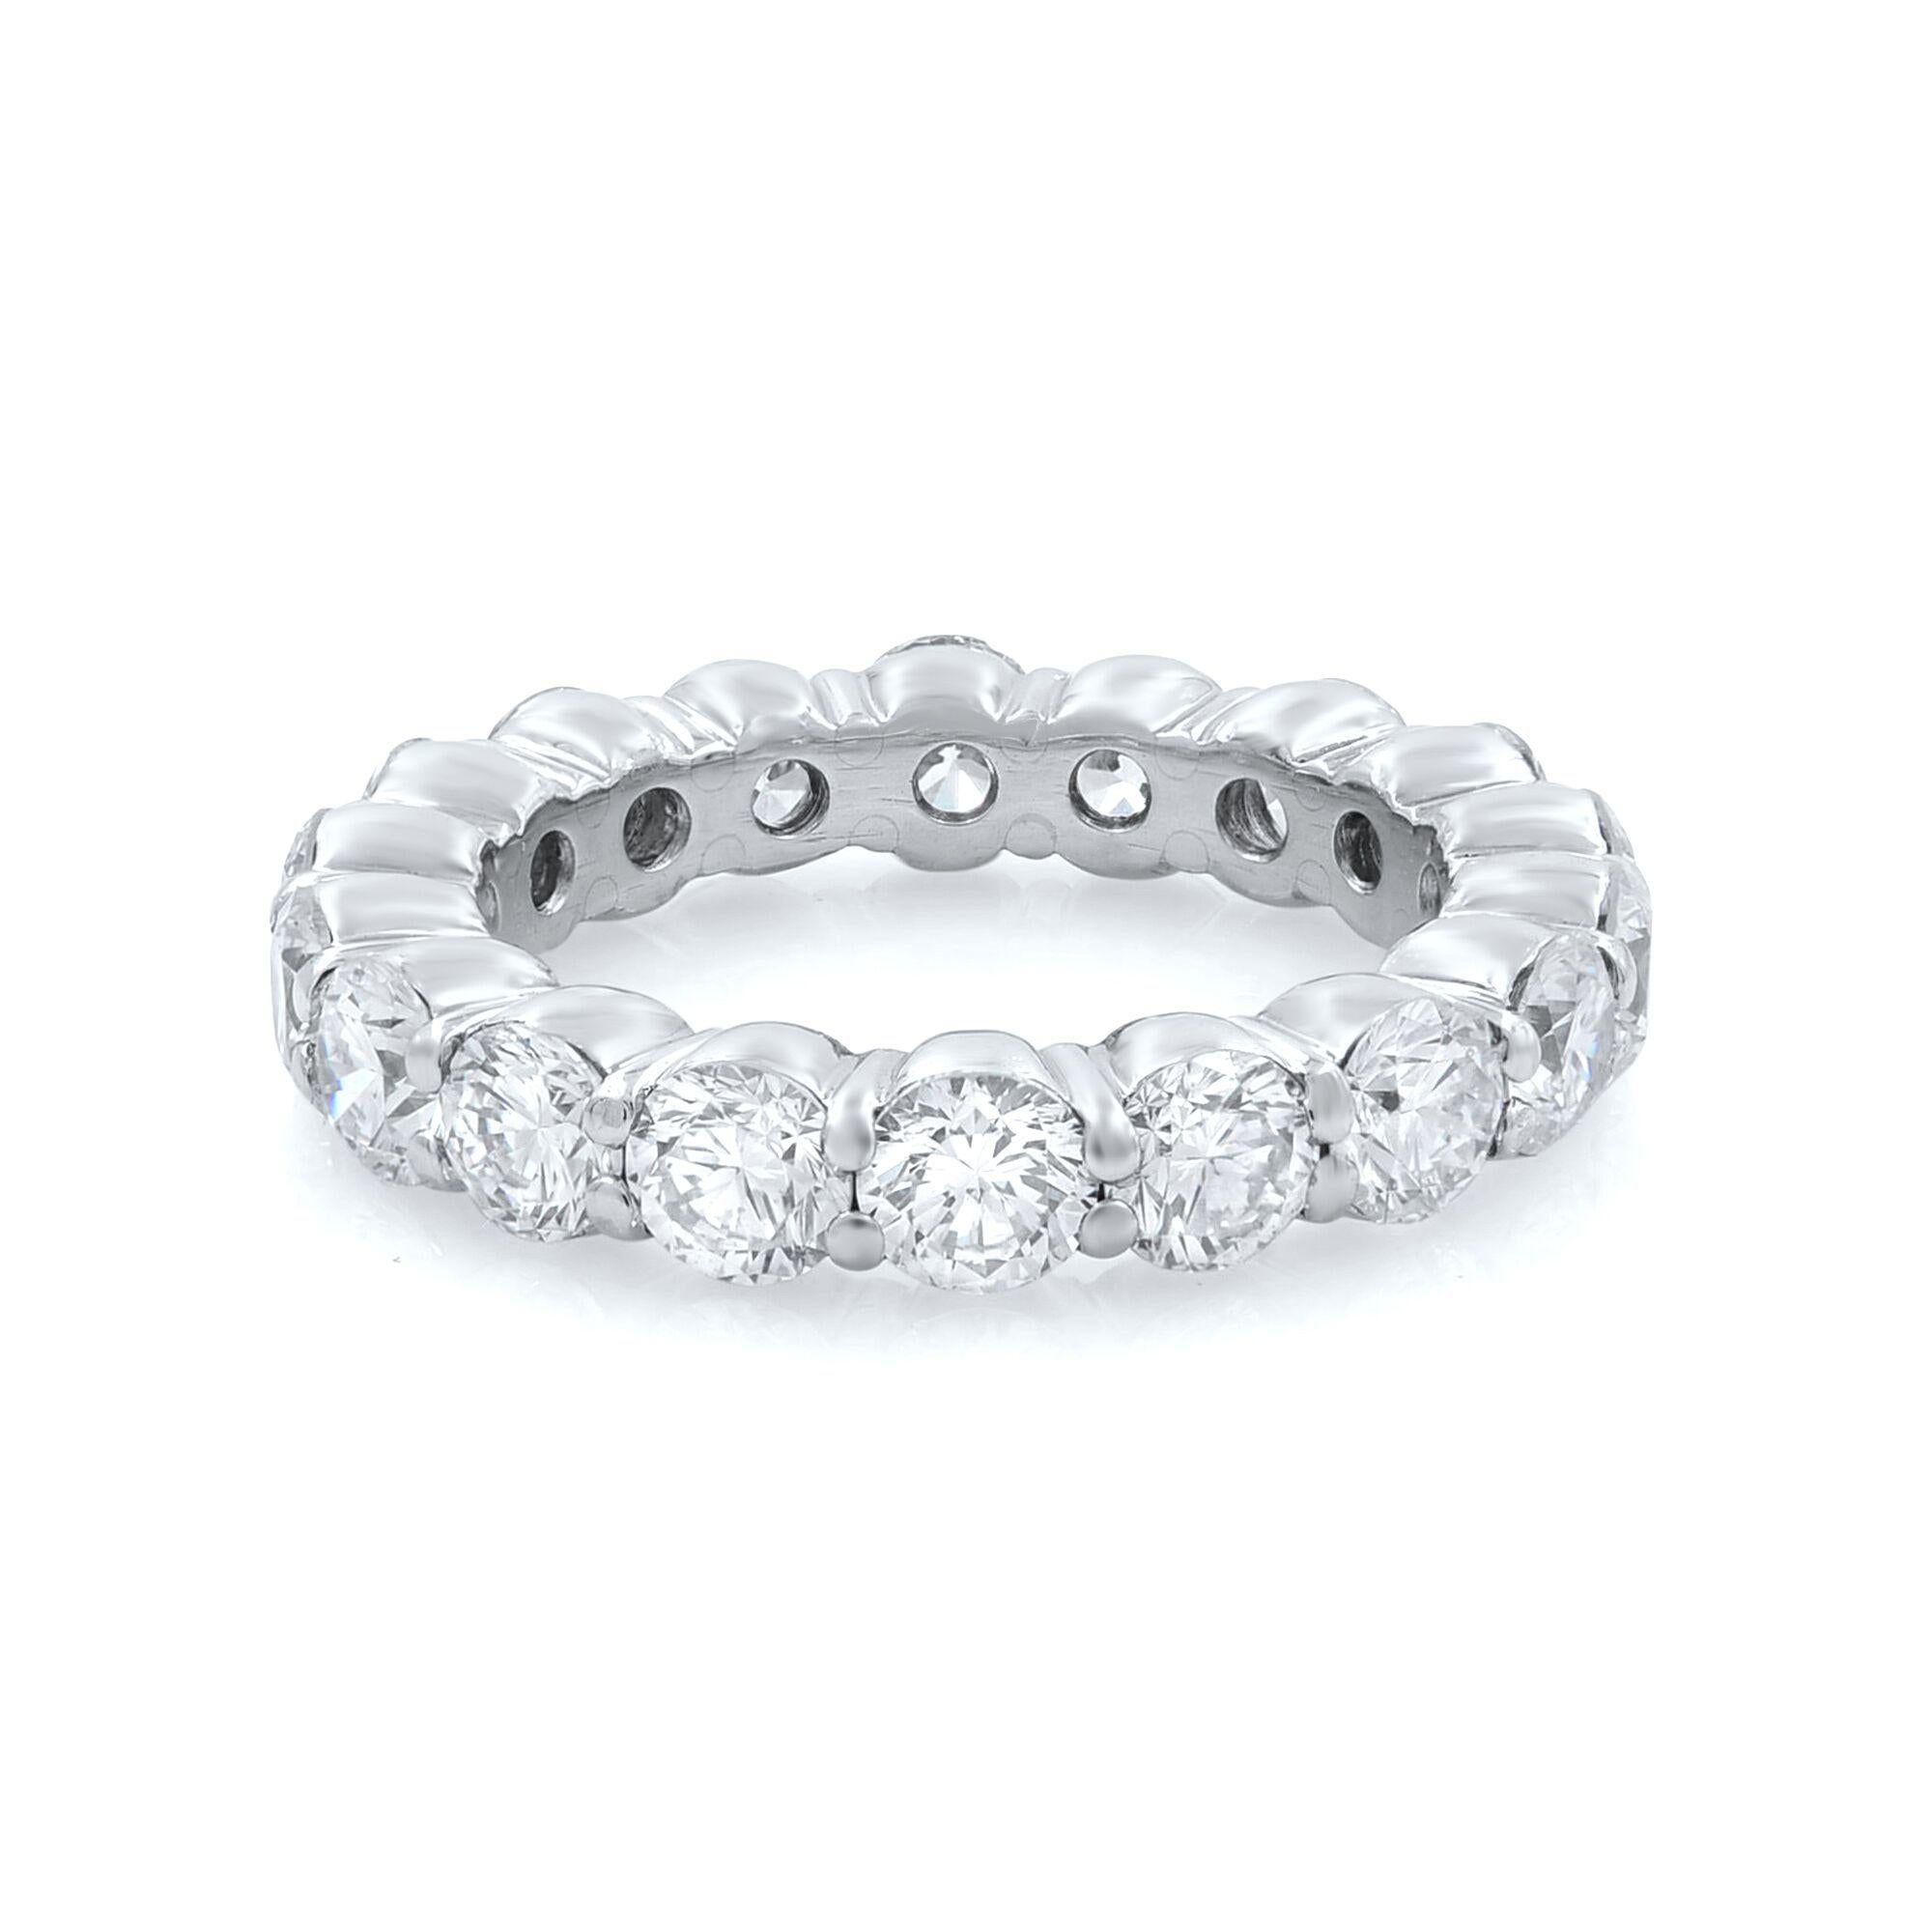 Eighteen brilliant-cut round bright near-colorless diamonds of F-G color, VS-SI clarity circle all the way around this unique contemporary diamond eternity ring band for women. The stones are elegantly set in a shiny Platinum shared-prong basket